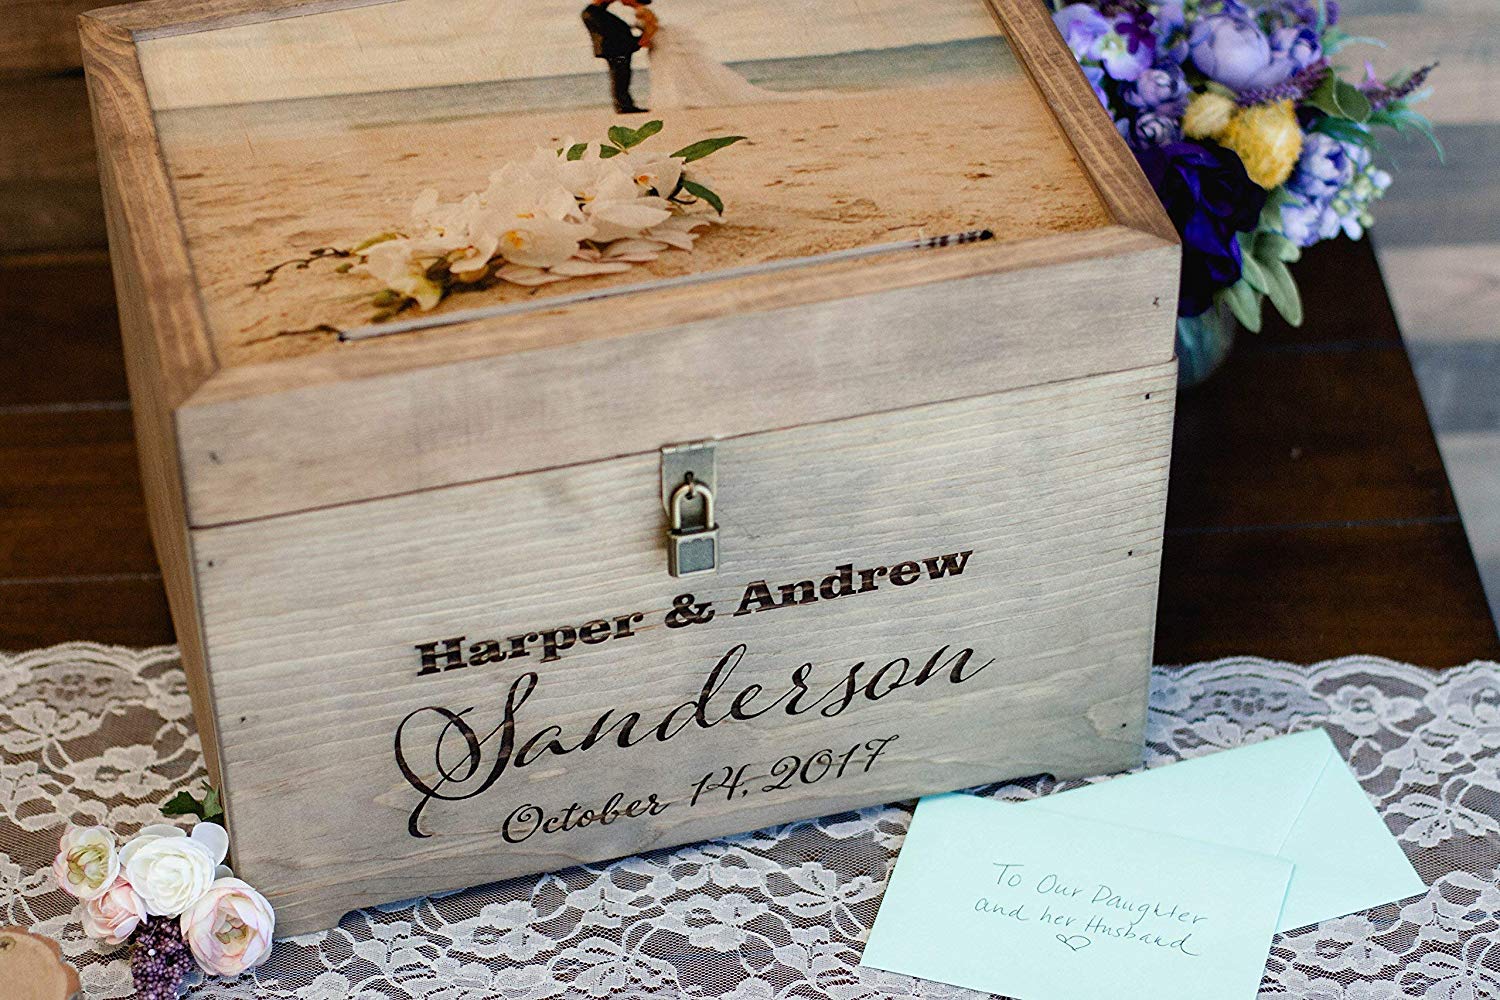 Wedding Card Box w/ Photo Print on Wood - Made in USA – Cades and